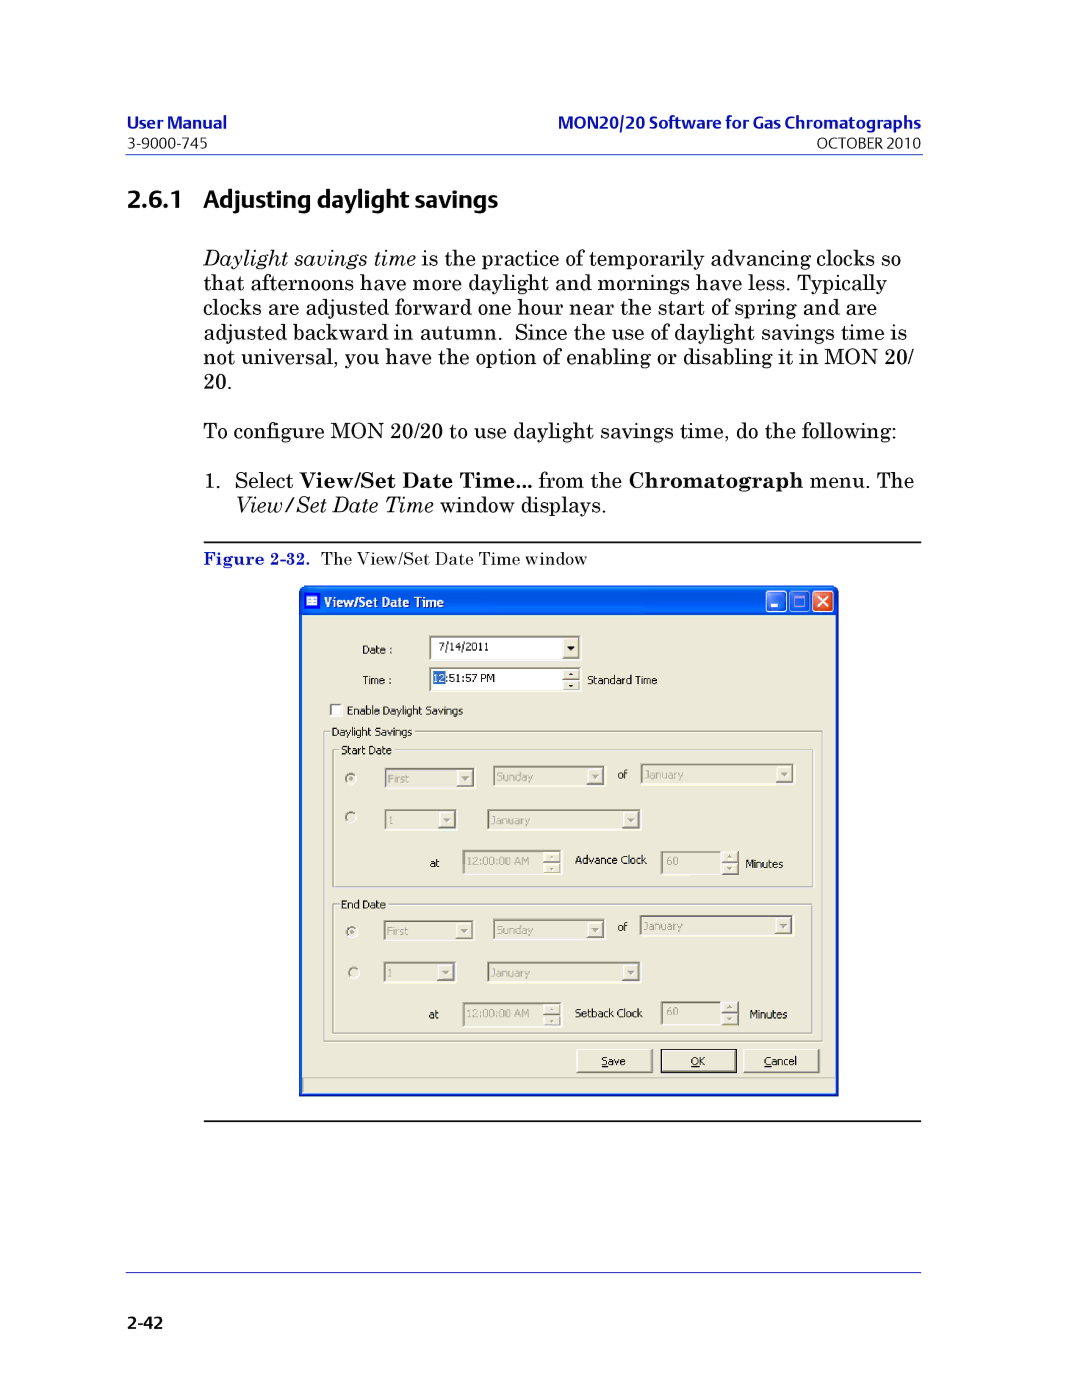 Emerson Process Management 3-9000-745 manual Adjusting daylight savings, The View/Set Date Time window 